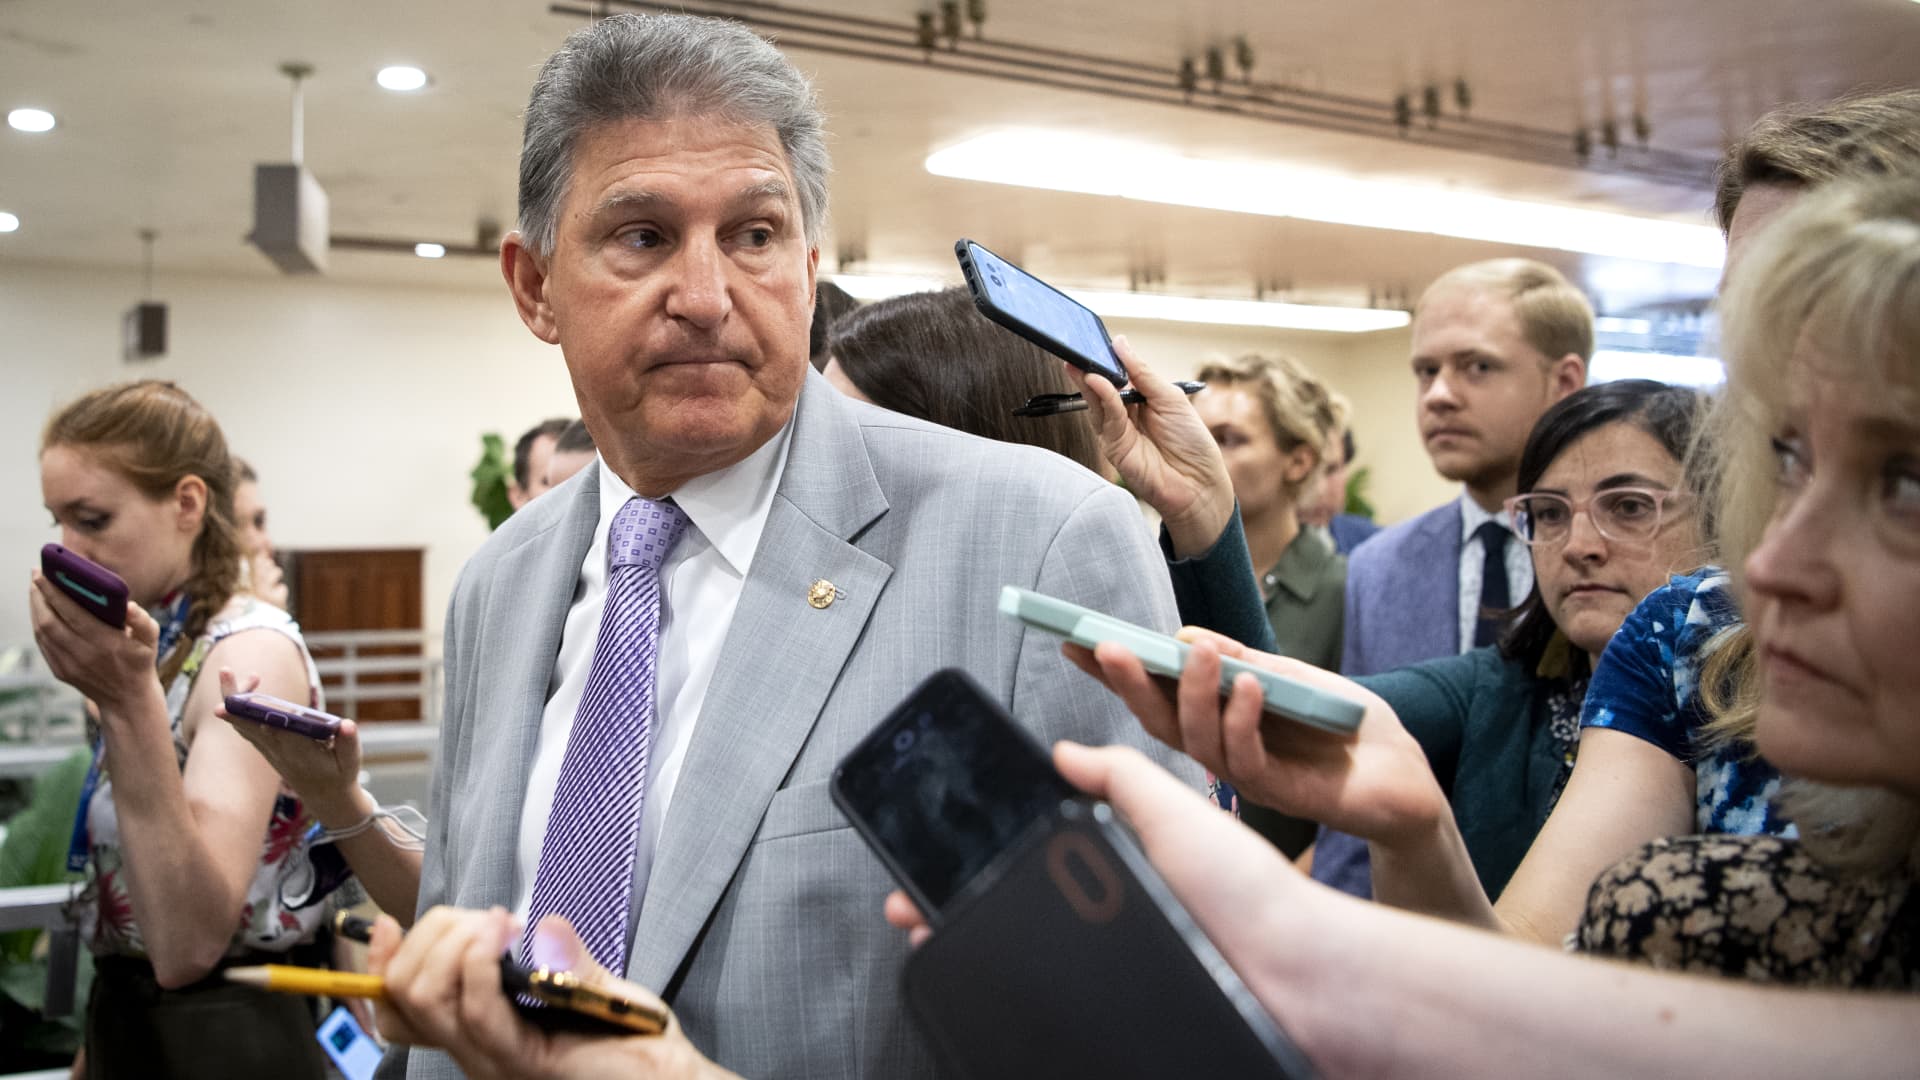 Sen. Joe Manchin, D-W. Va., talks with reporters as he makes his way to the Senate floor for a vote in Washington on Tuesday, July 13, 2021.